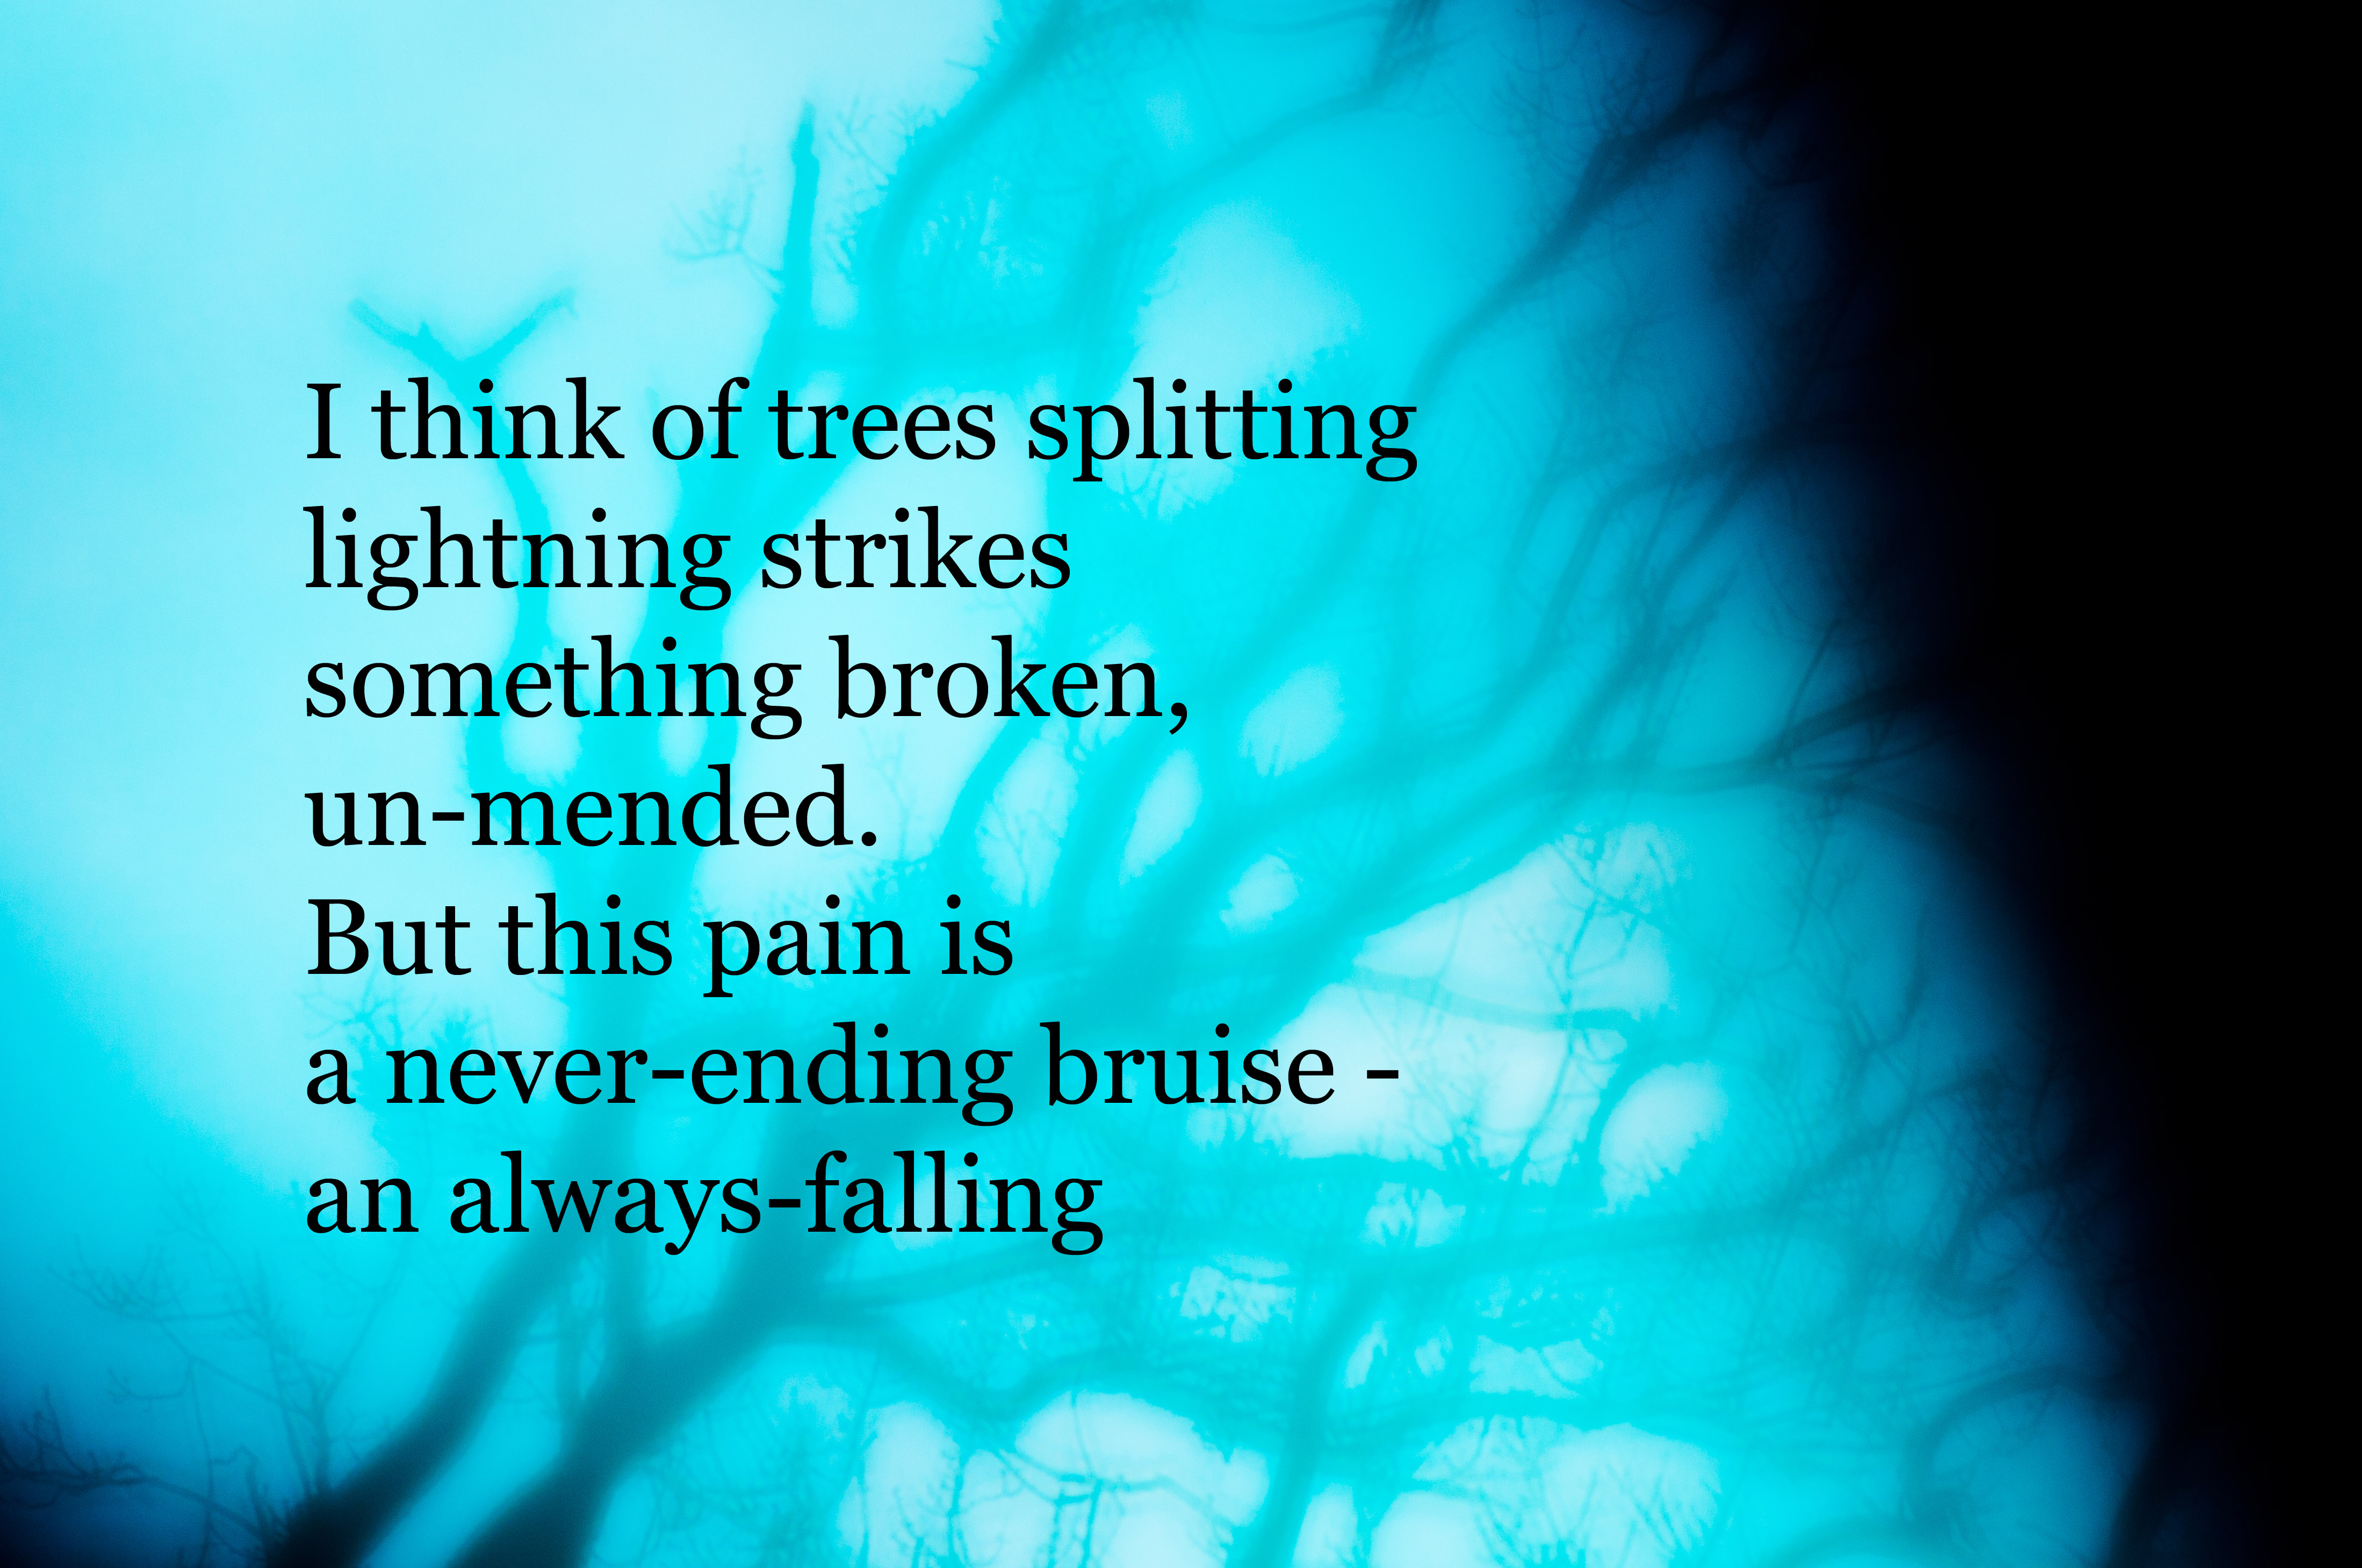 A blue-toned, blurry image of a leafless tree in shadow, over which is superimposed this short poem: ‘I think of trees splitting lightning strikes something broken, un-mended. But this pain is a never-ending bruise - an always-falling’